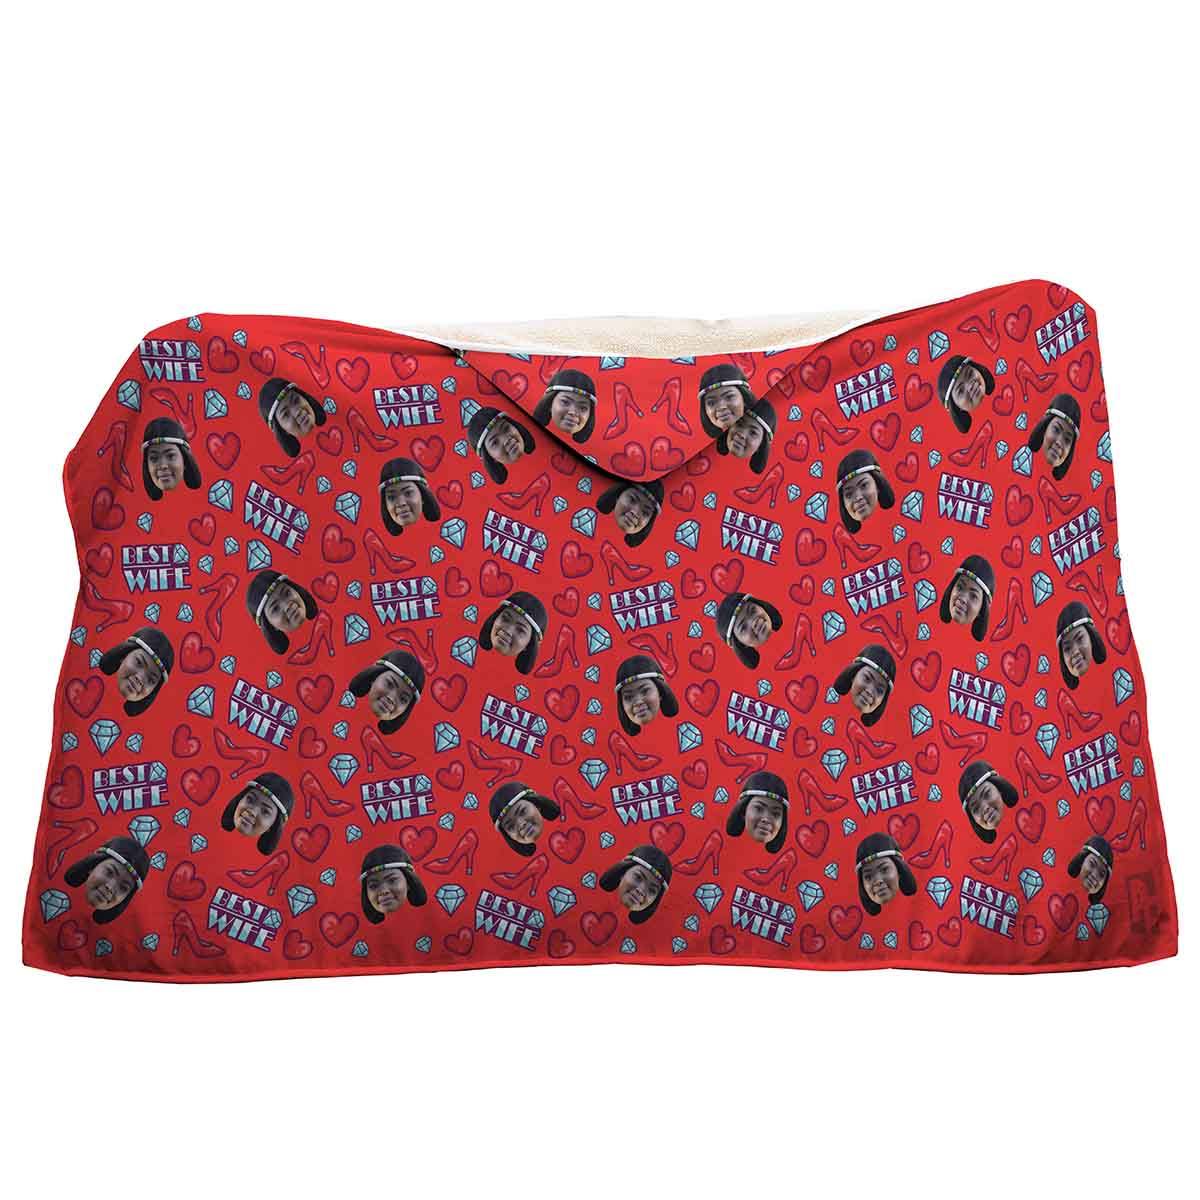 Red Wife personalized hooded blanket with photo of face printed on it